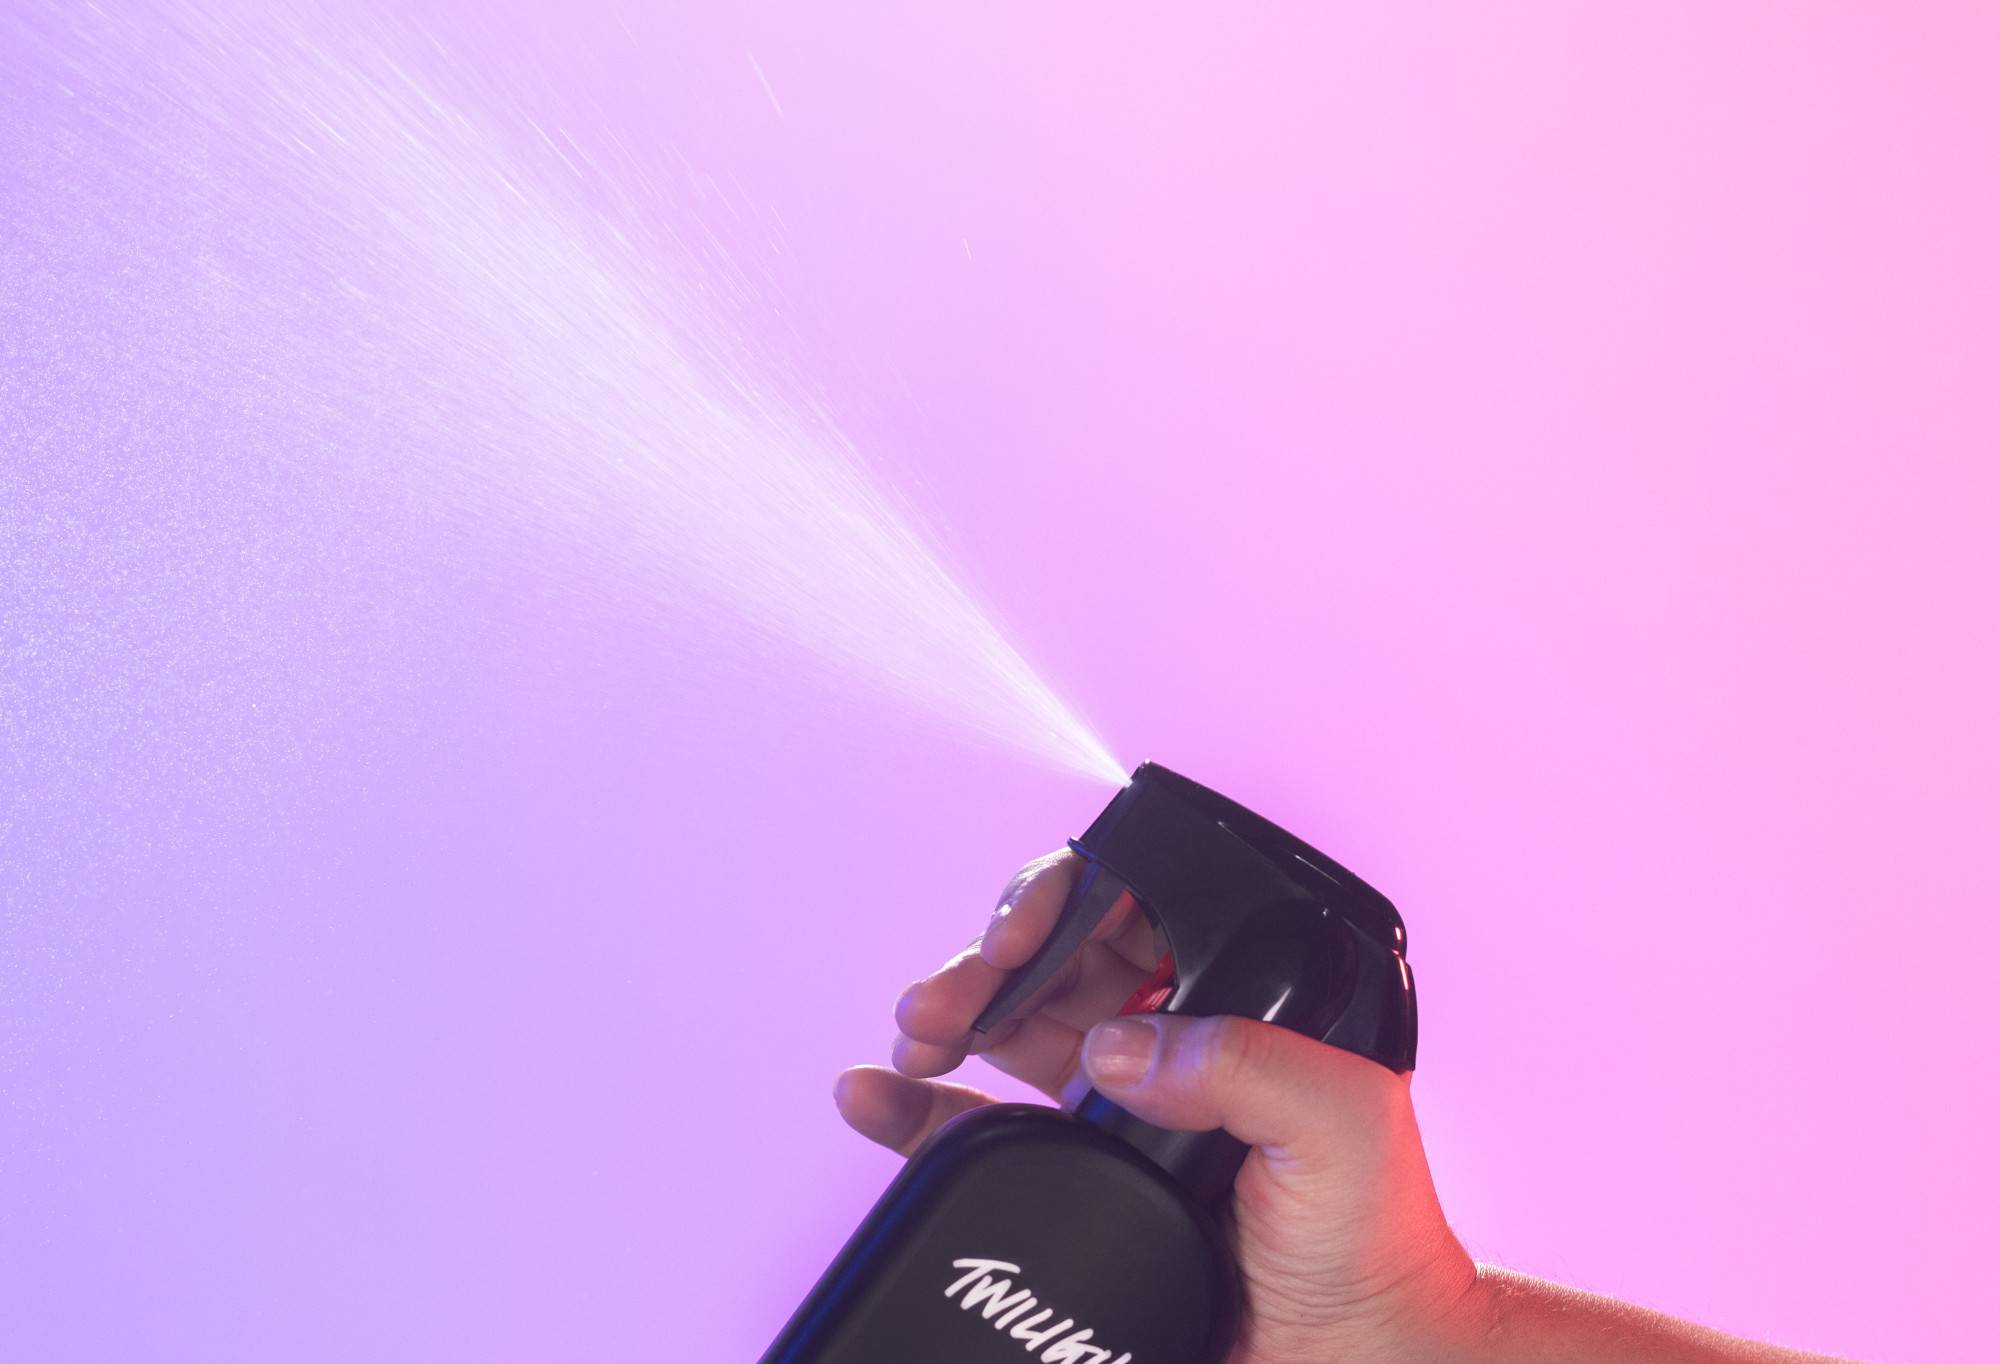 Twilight body spray is sprayed up into the air, in front of a bright, light purple to light pink gradient background.